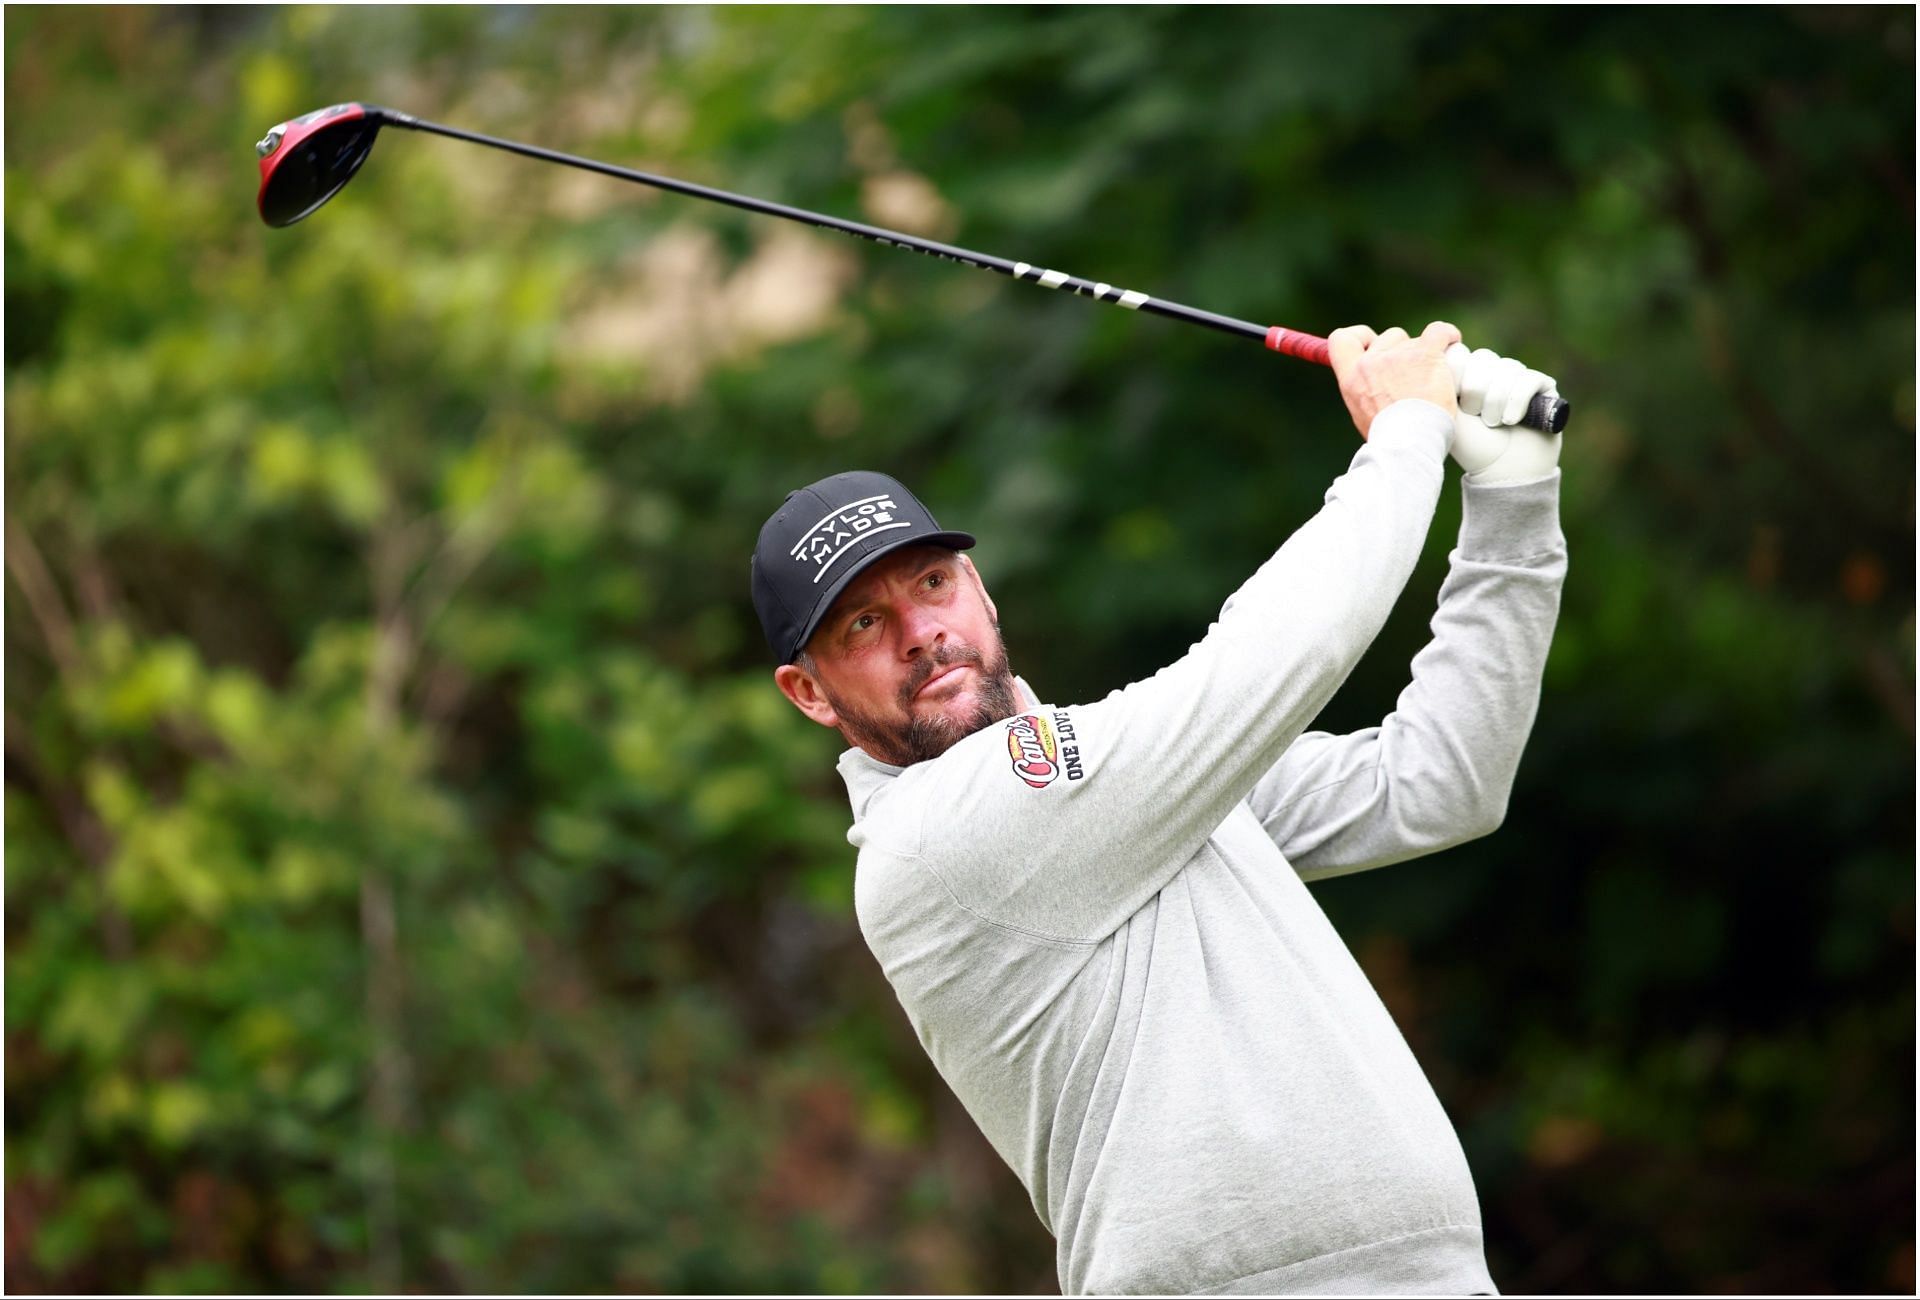 Michael Block at the RBC Canadian Open (via Getty Images)